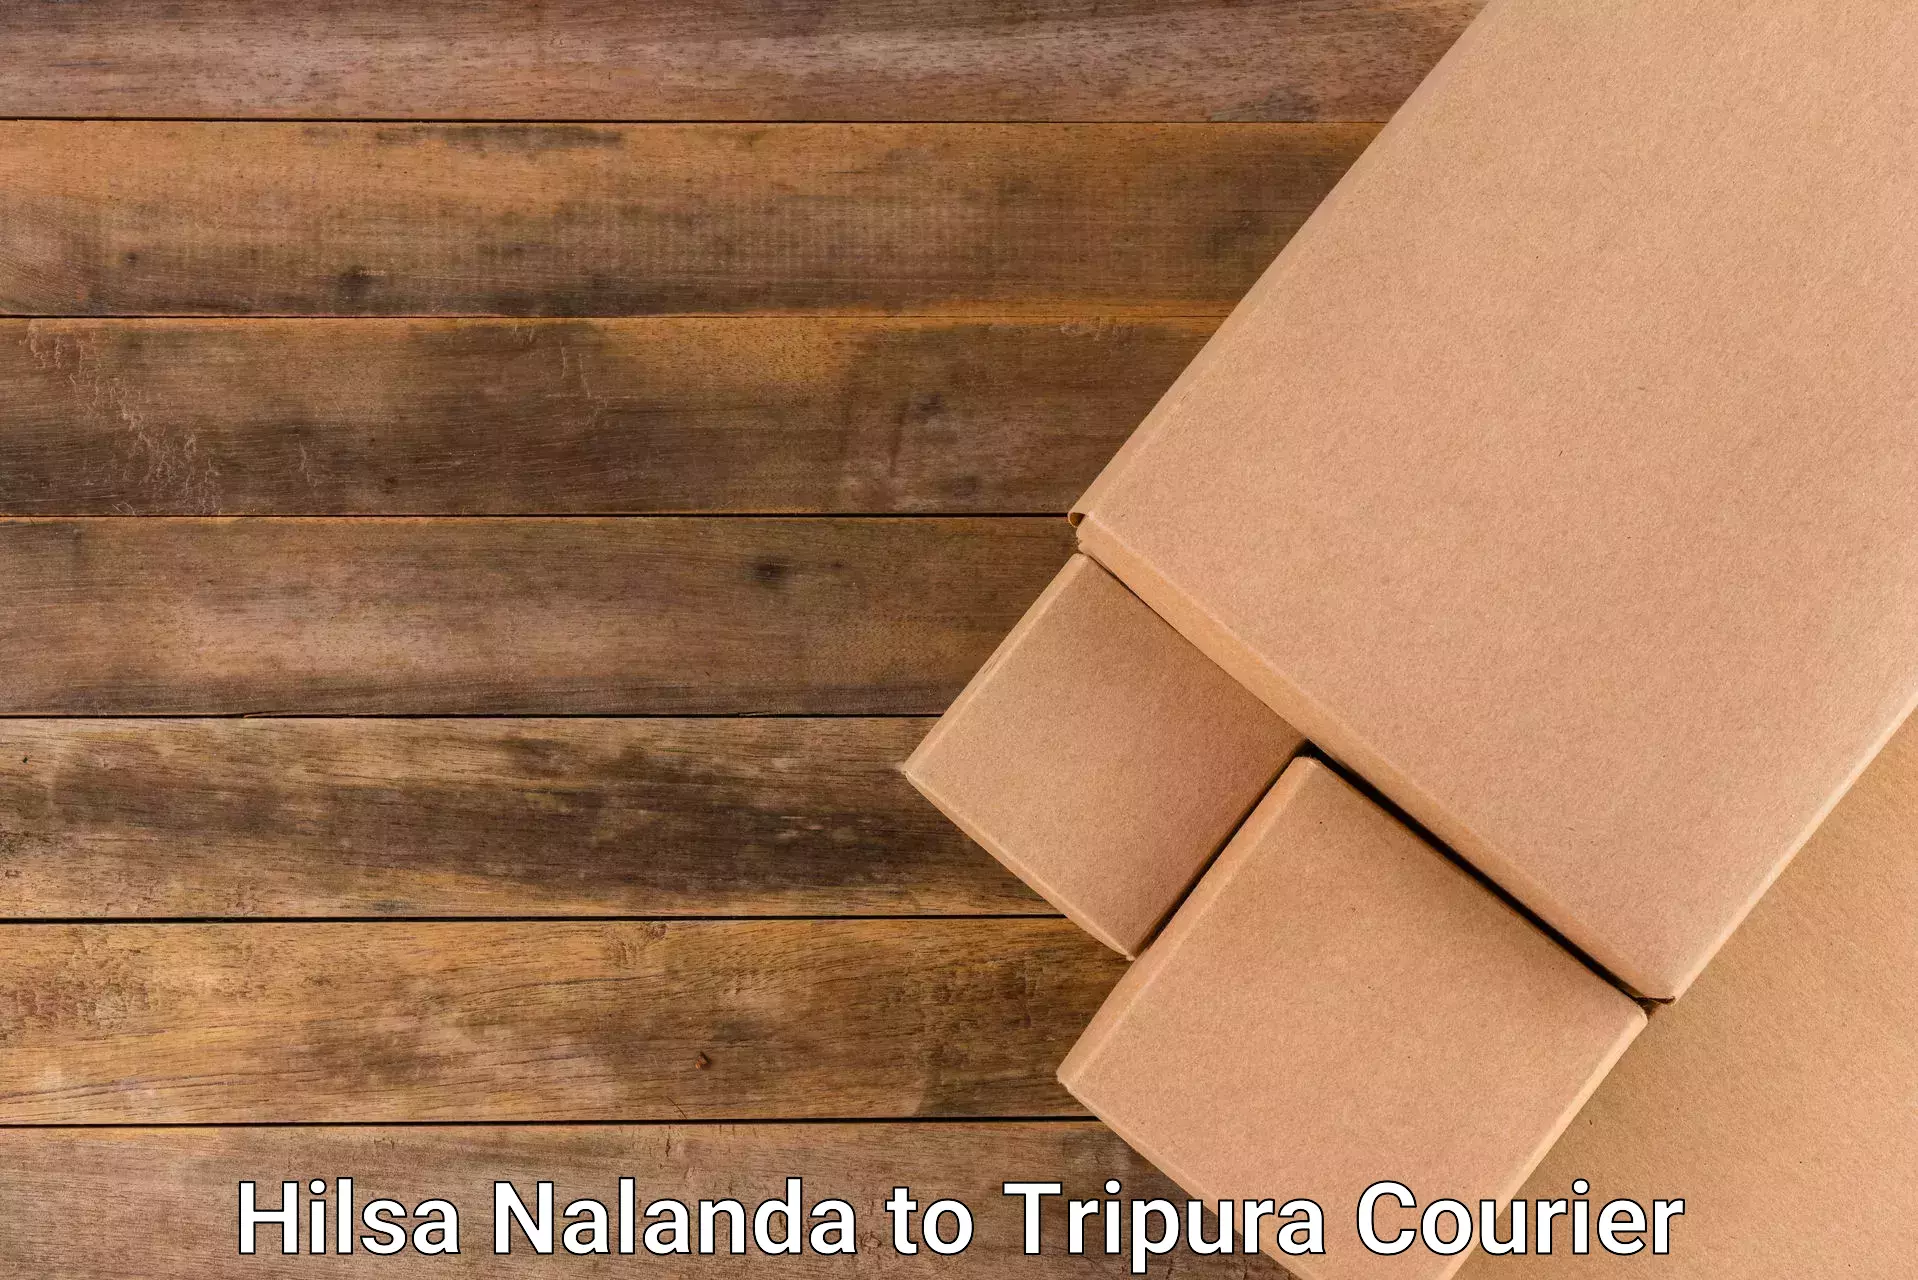 Express delivery network in Hilsa Nalanda to Tripura